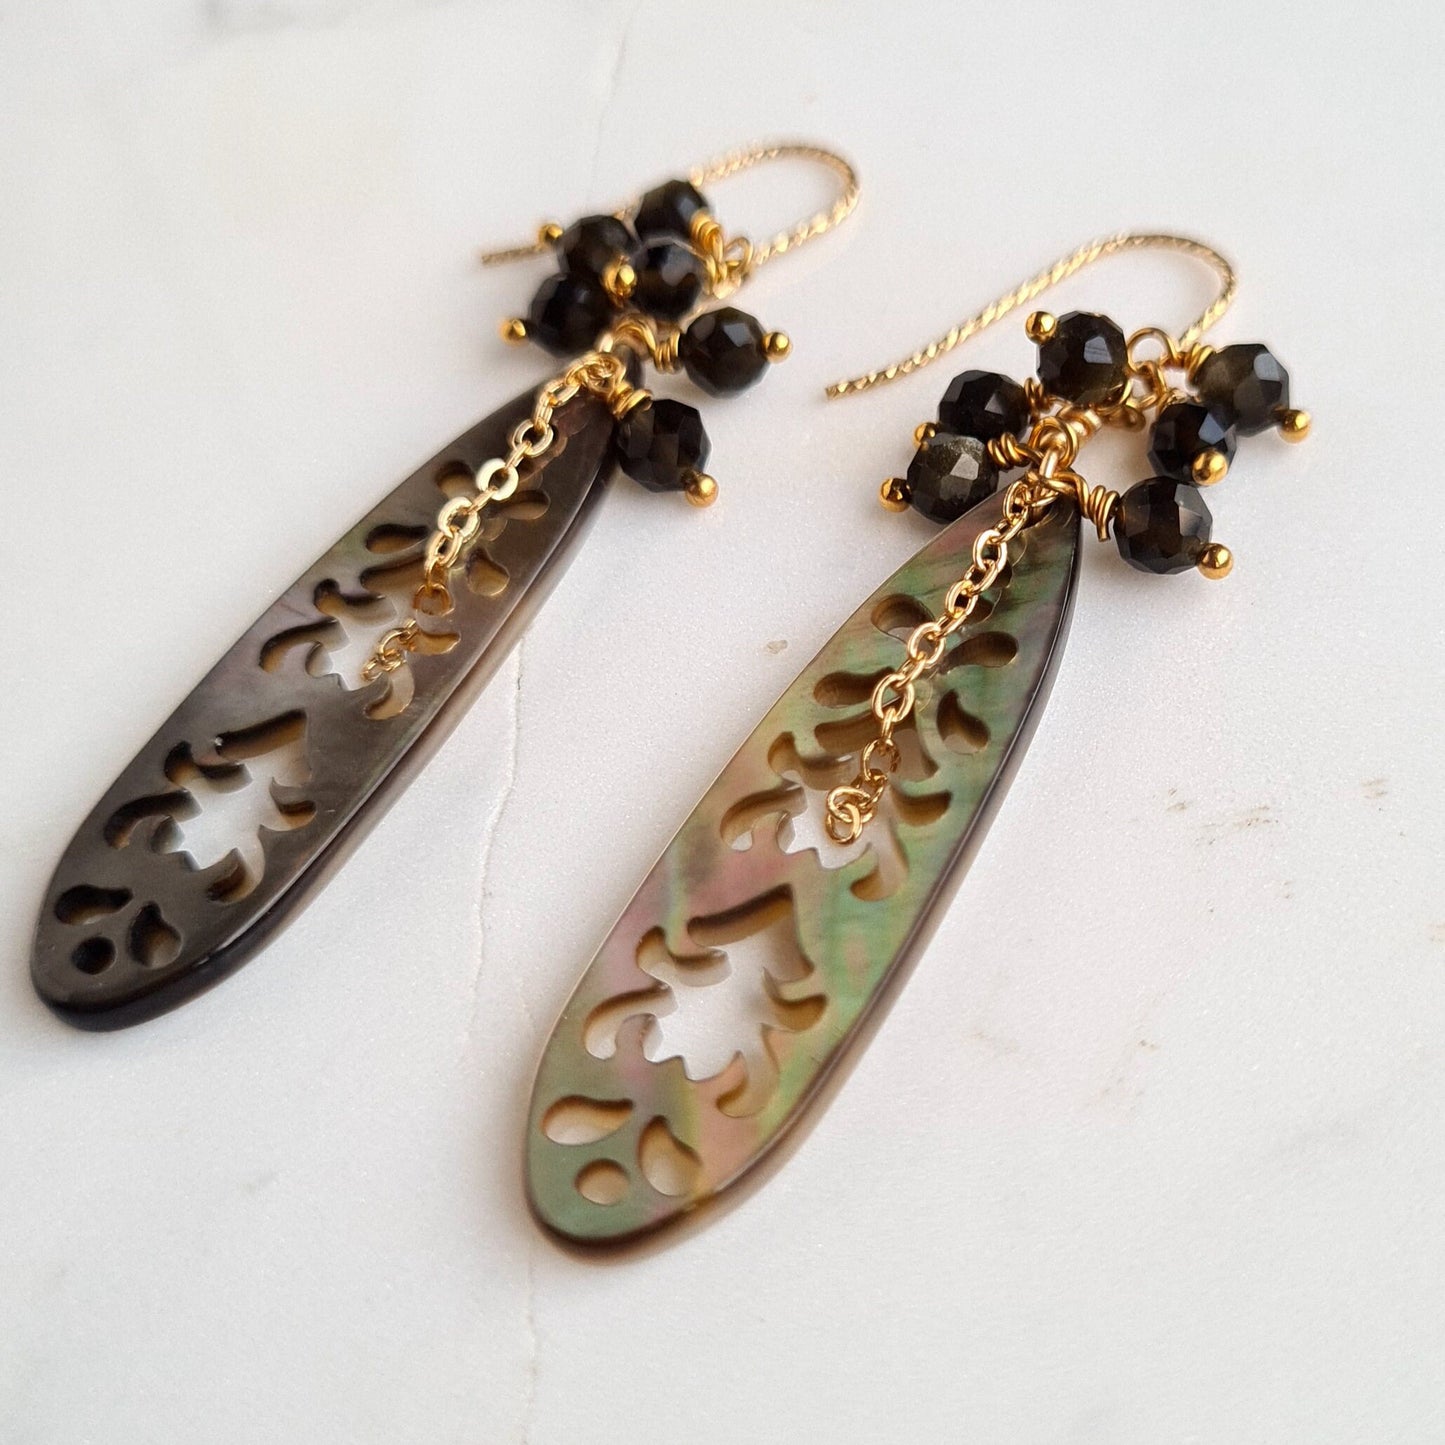 Black carved mother of pearl with golden obsidian cluster gemstone earrings